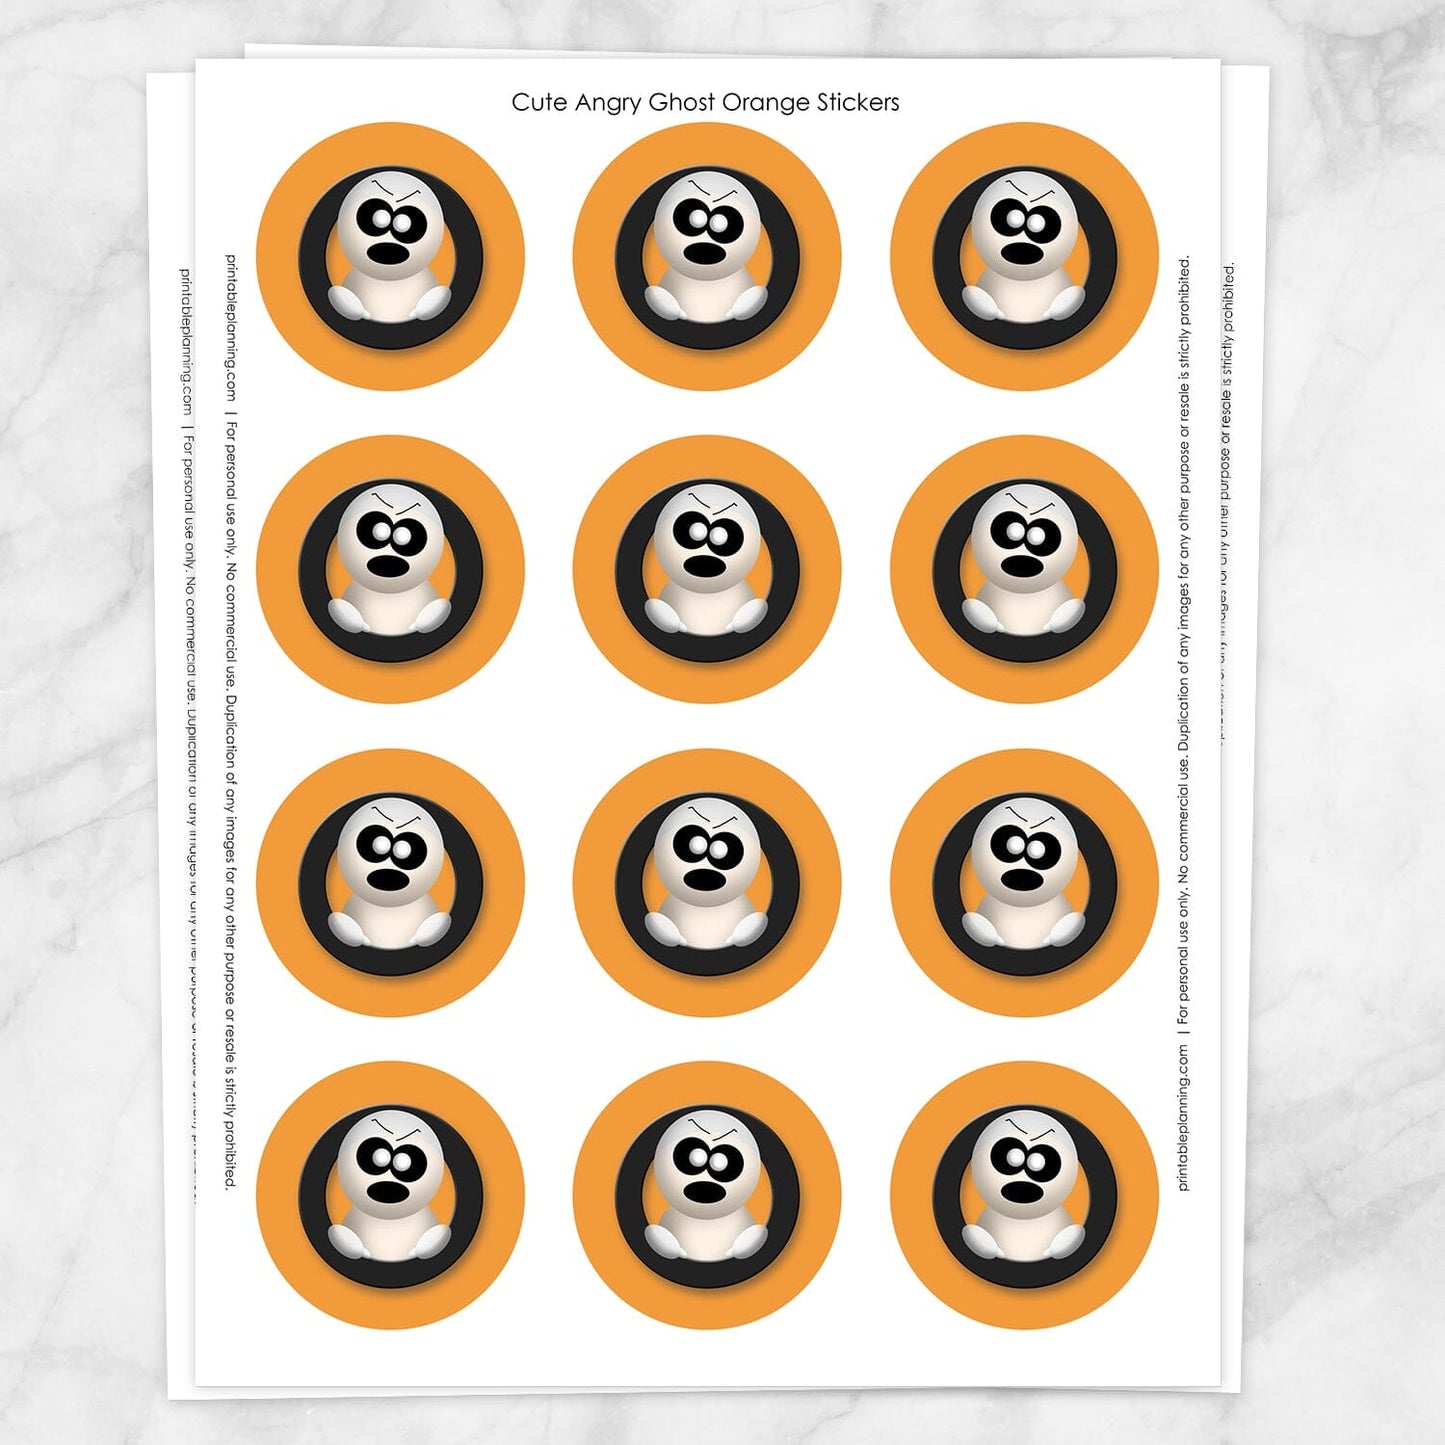 Printable Cute Angry Ghost Halloween Stickers in Orange at Printable Planning. Sheet of 12 stickers.